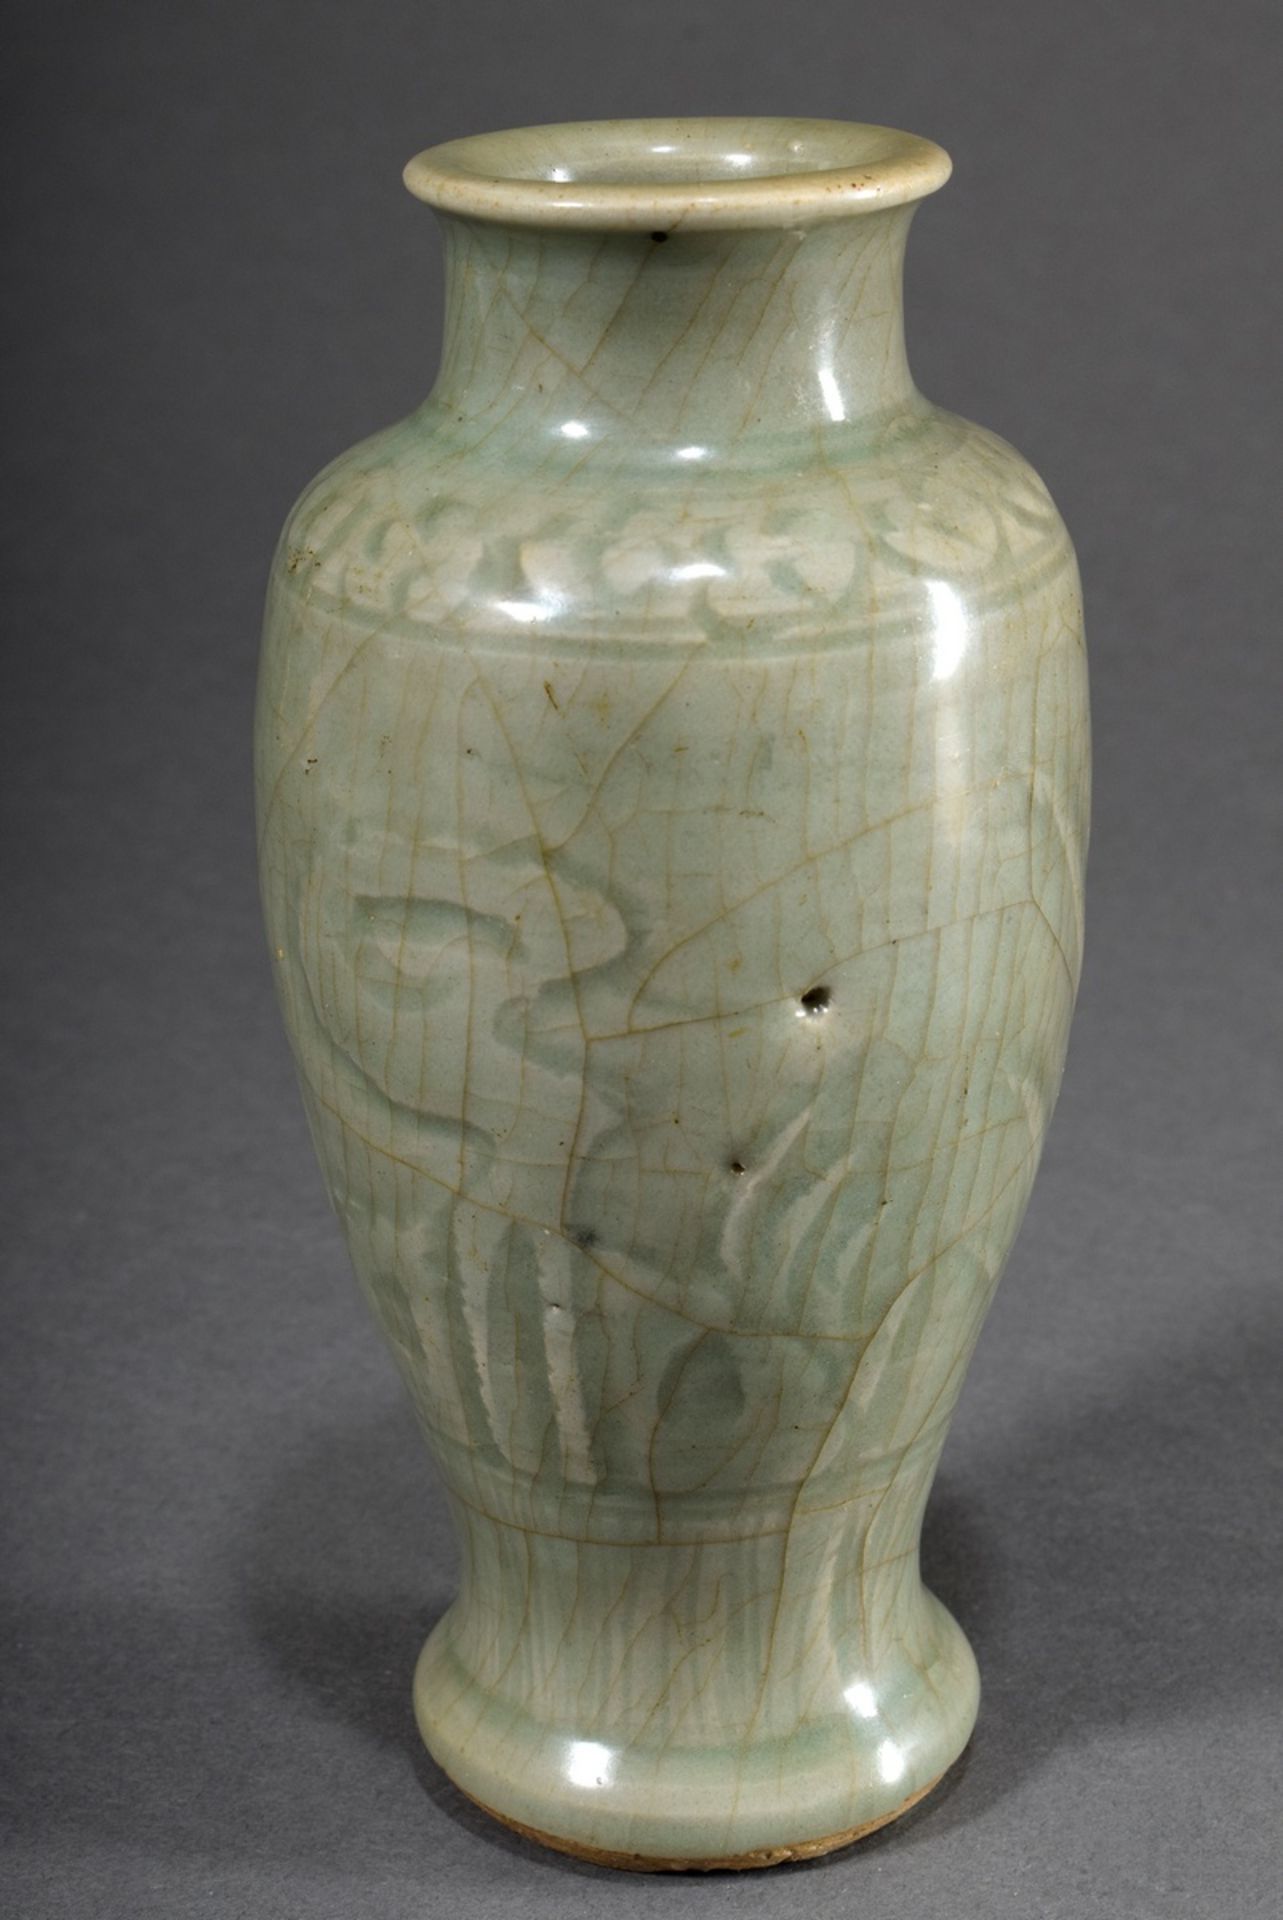 Small Longquan vase with incised decoration and celadon glaze and craquelée, Ming Dynasty, 16th cen